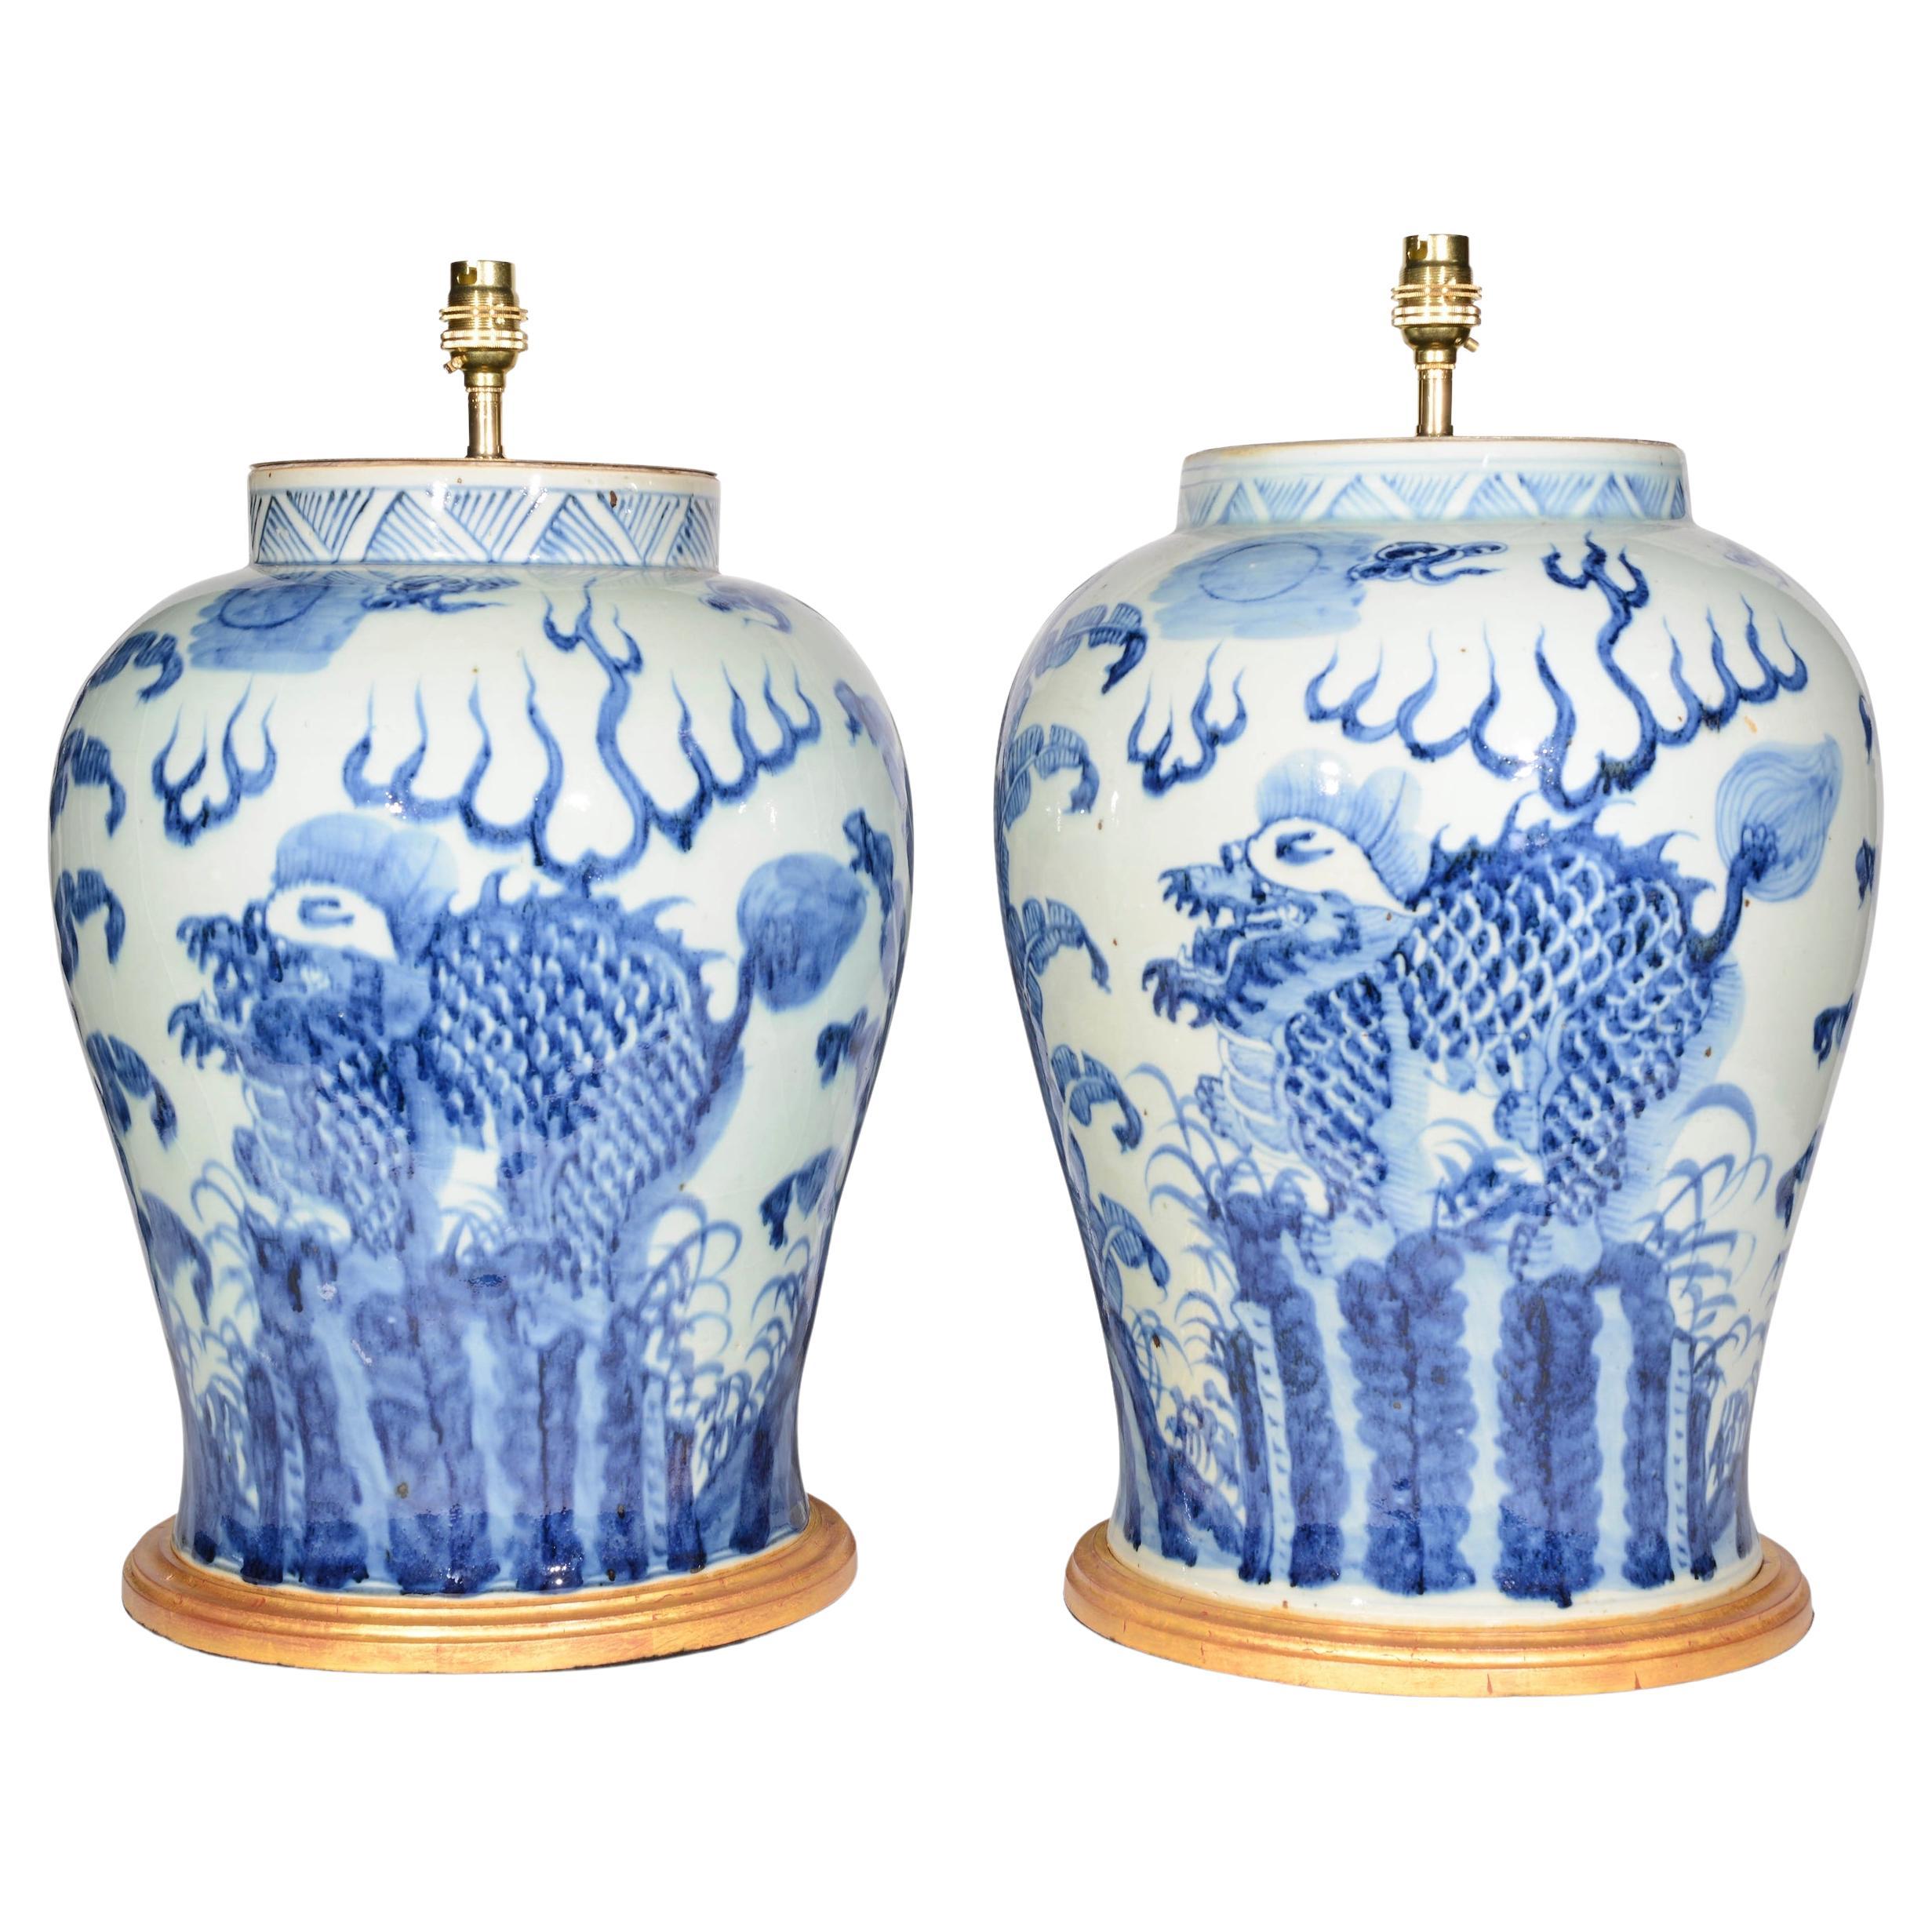 Large Pair of 20th Century Chinese Blue and White Porcelain Table Lamps